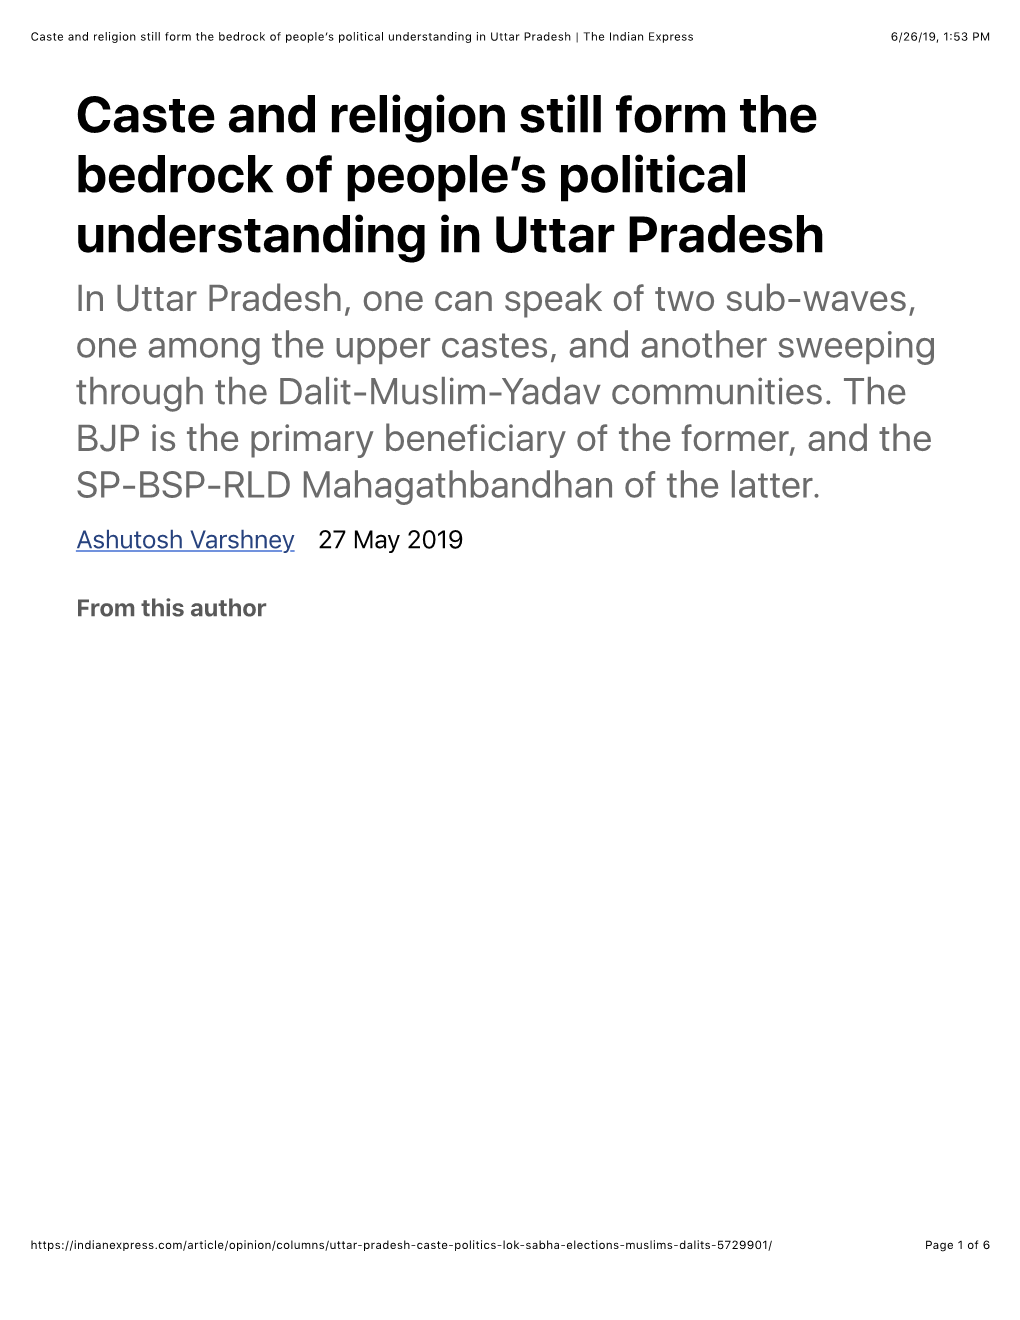 Caste and Religion Still Form the Bedrock of People's Political